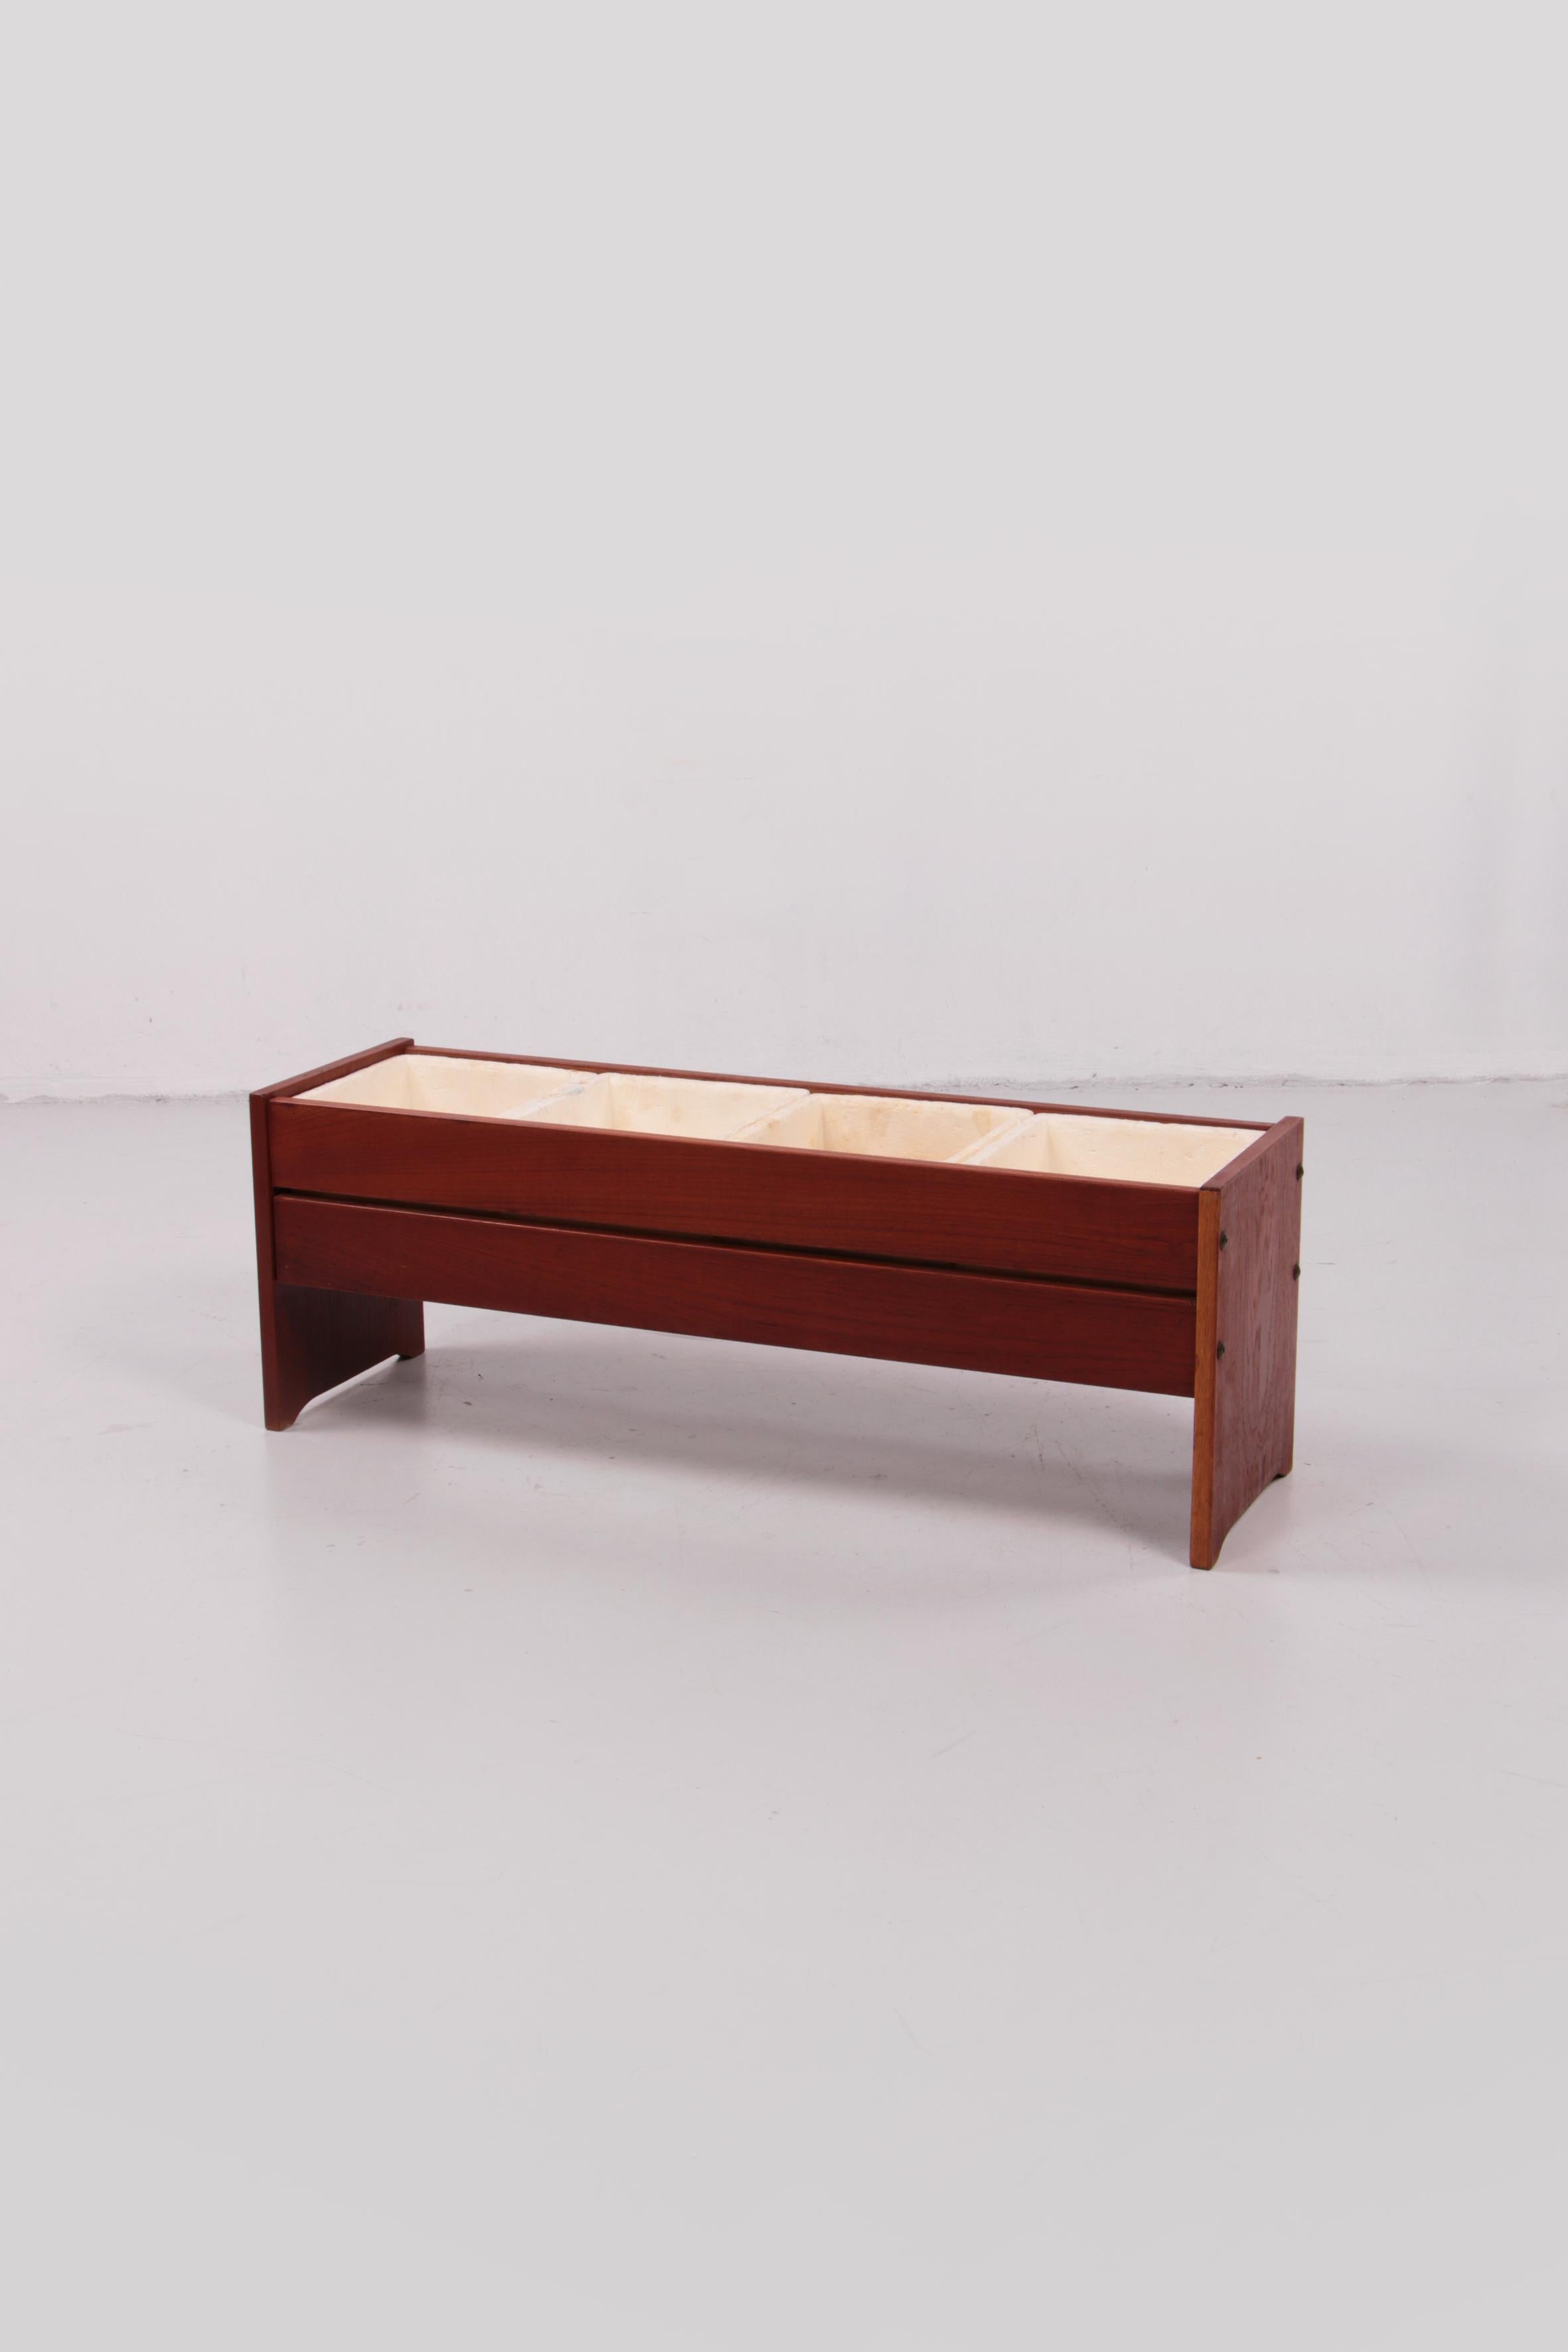 Bohemian style teak design planter, 1960 Denmark.


Scandinavian minimalism! Beautiful in its simplicity, this special Danish planter made of light teak wood. Country of origin: Denmark. Particularly beautiful due to its slender legs and